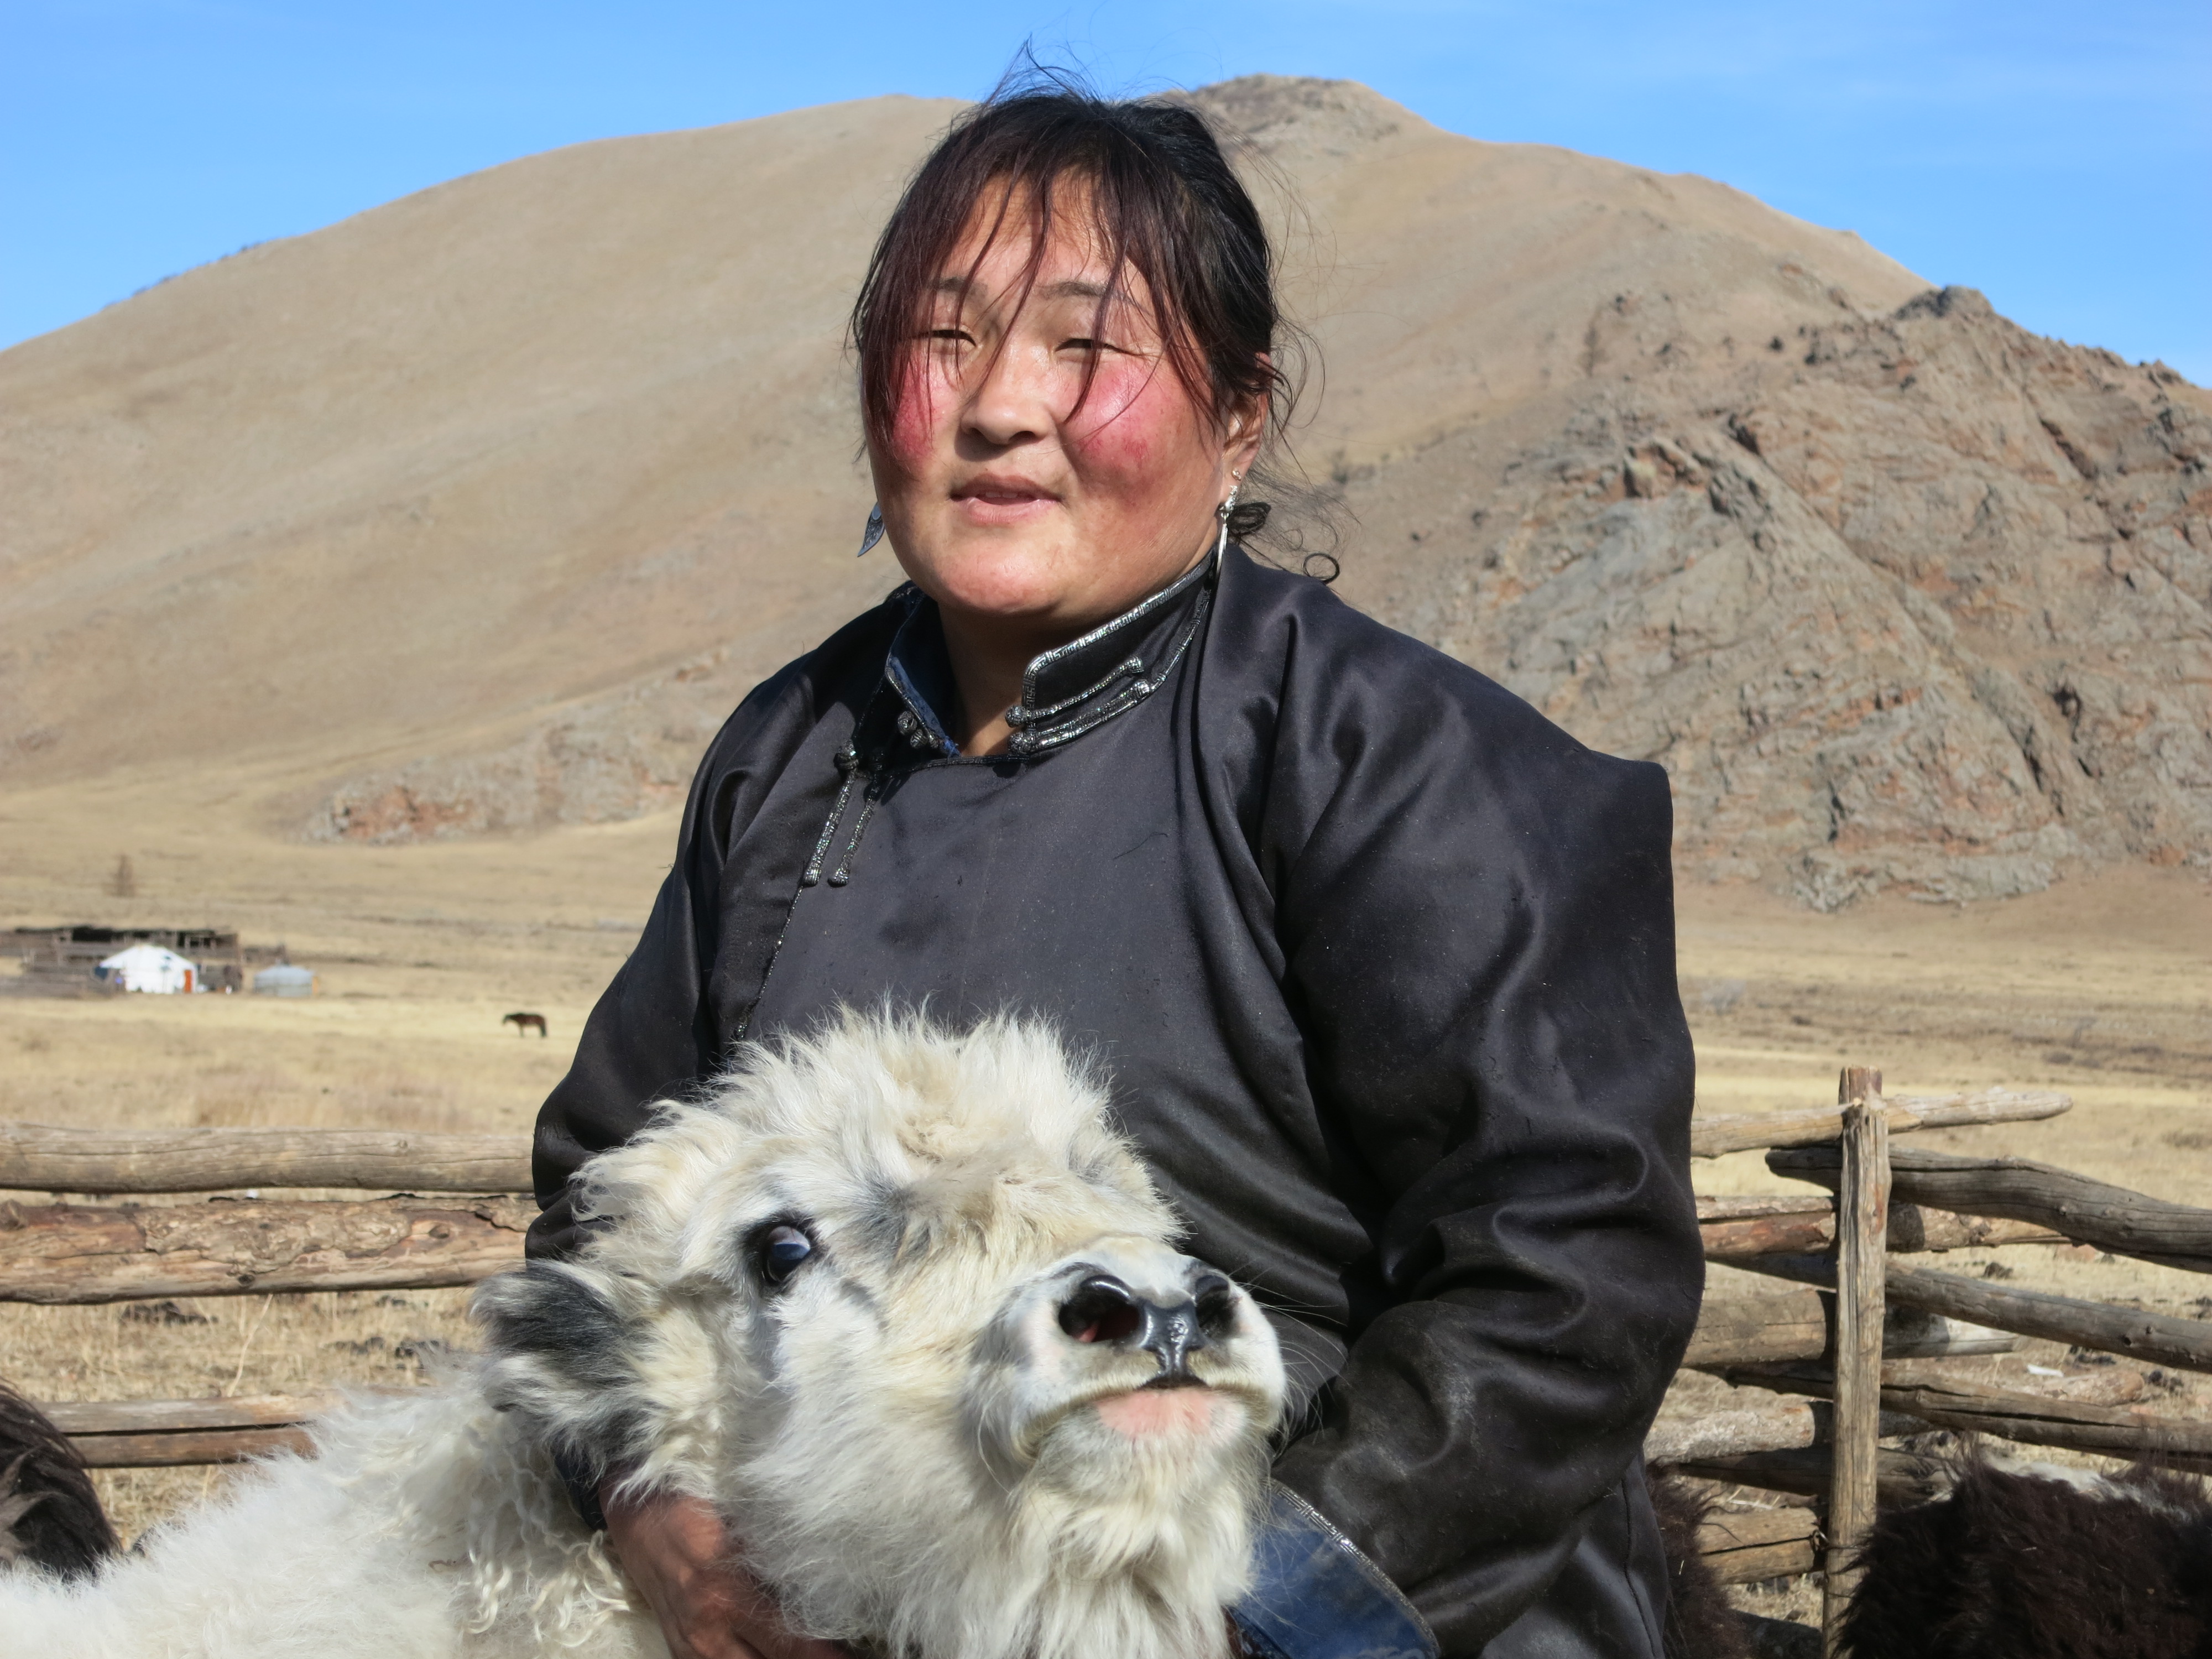 Herdswoman holds a young yak by the neck.